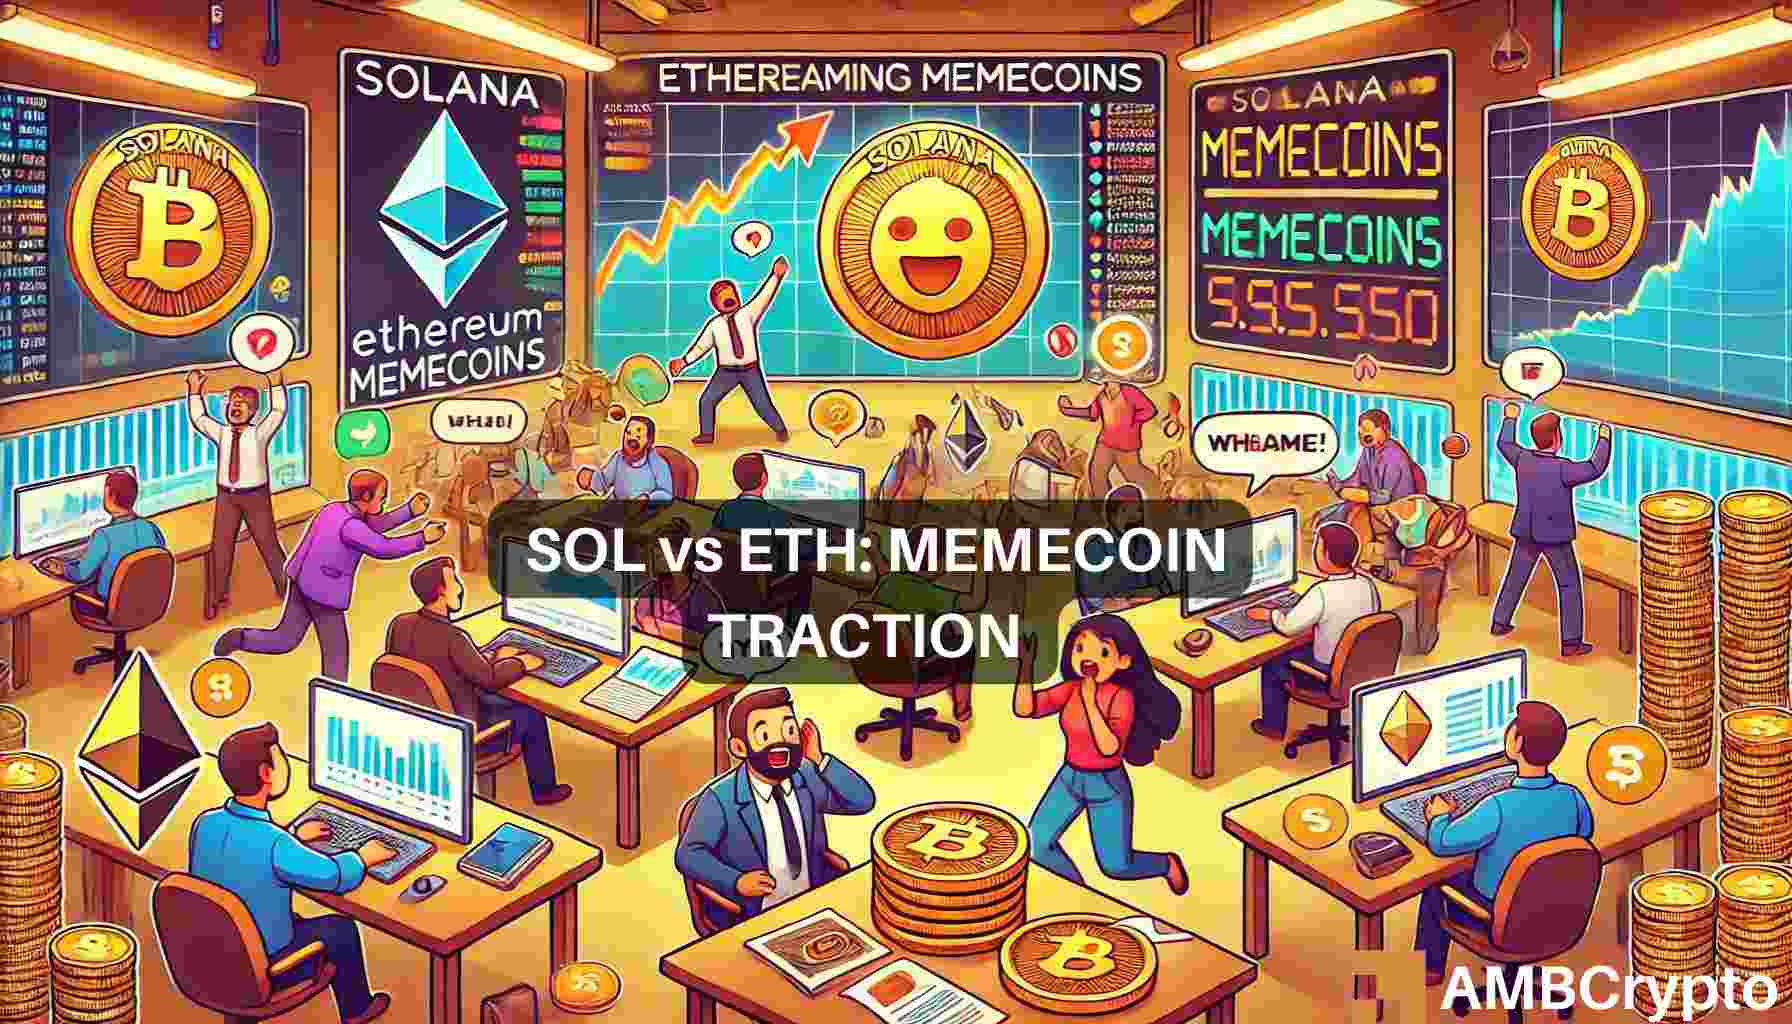 ‘In the Solana ecosystem, memecoins reign’: WIF, BONK outshine ETH memes